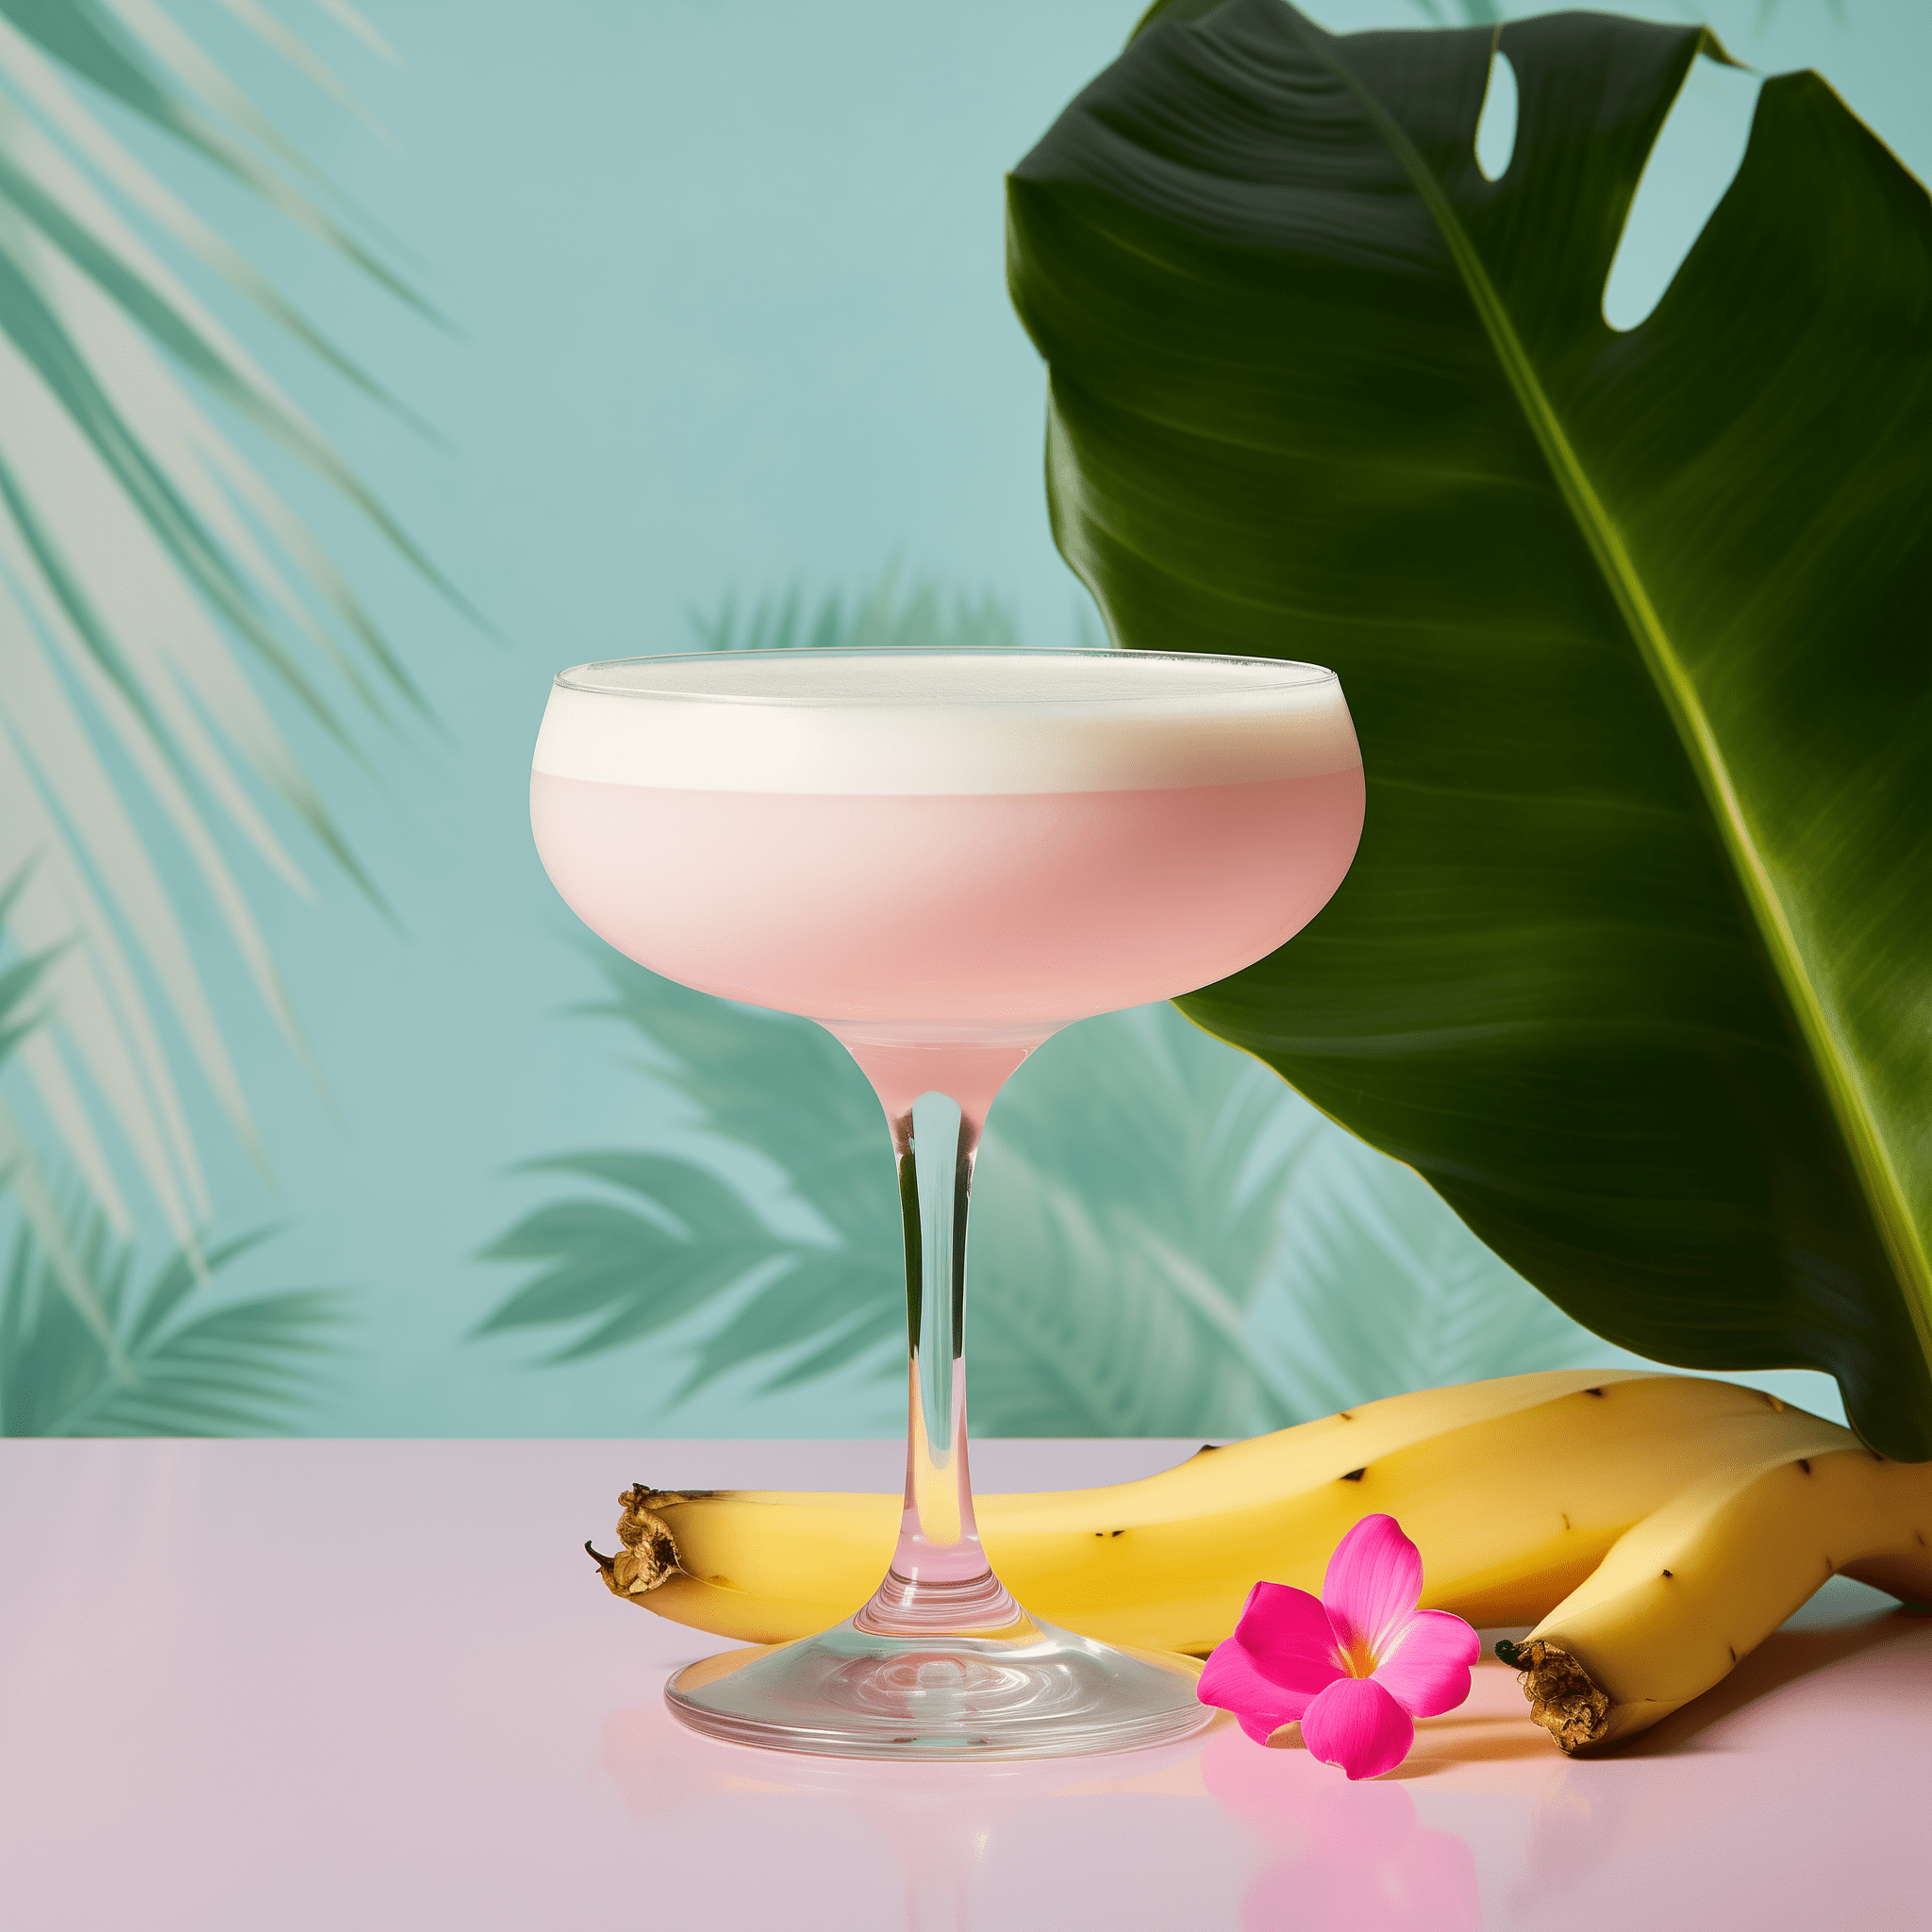 Banana Cow Cocktail Recipe - The Banana Cow is a creamy and rich cocktail with a sweet banana flavor that's balanced by the warmth of the rum. The grenadine adds a hint of tartness and a beautiful blush color, while the nutmeg provides a subtle spiciness that complements the overall profile.